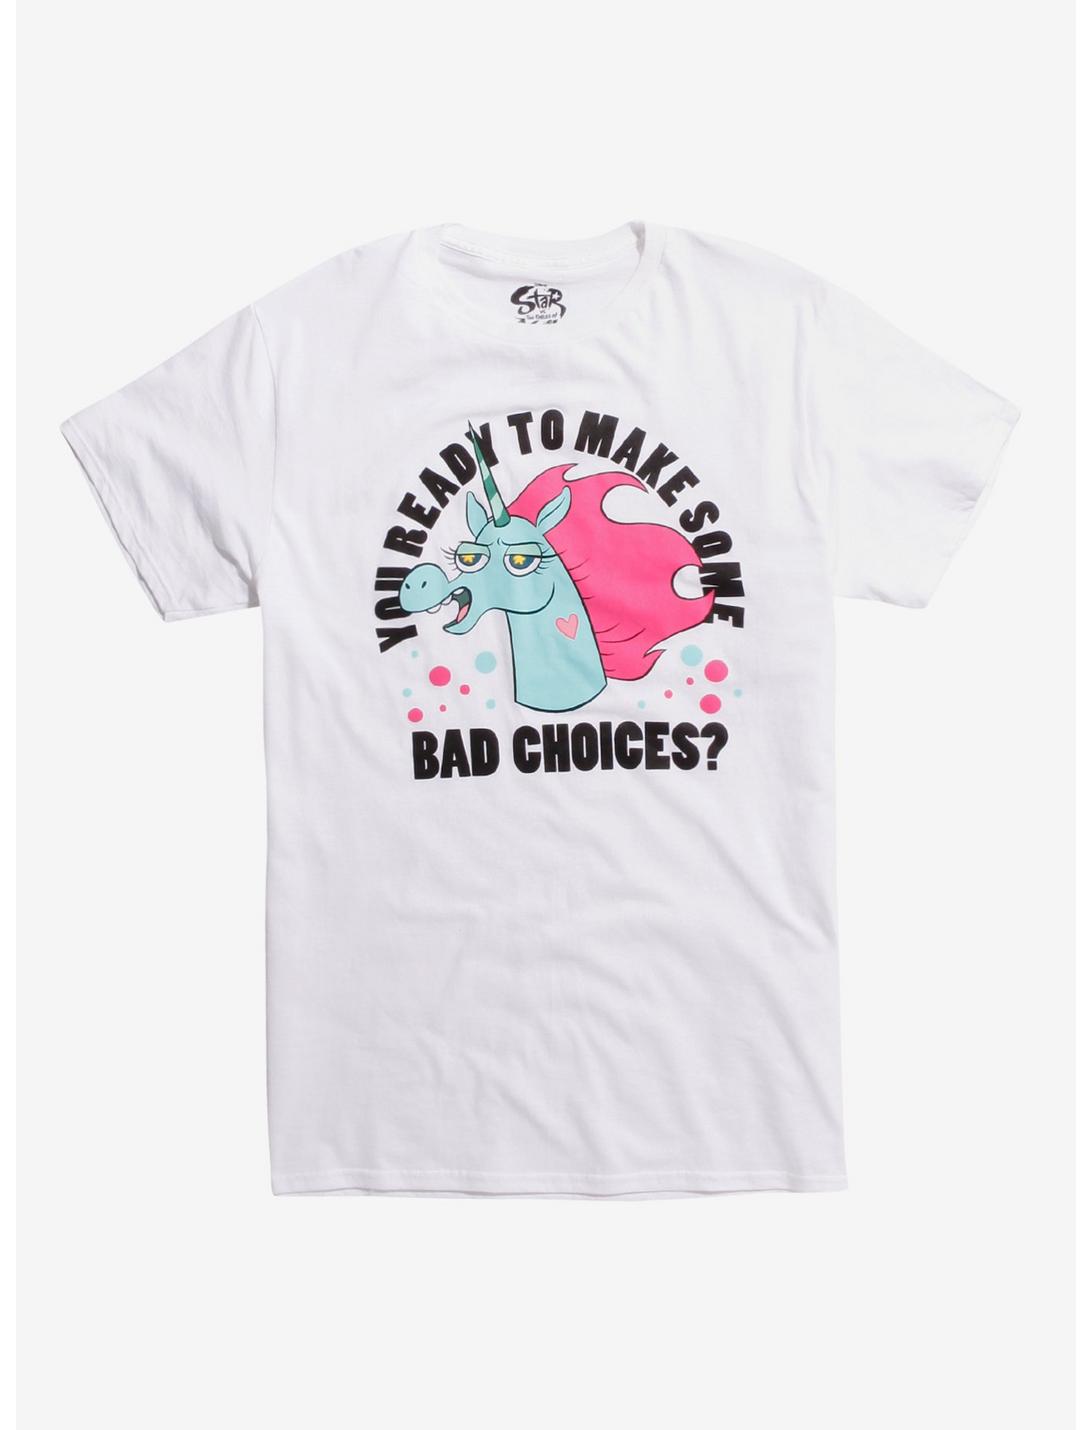 Star Vs. The Forces Of Evil Pony Head Bad Choices T-Shirt, WHITE, hi-res